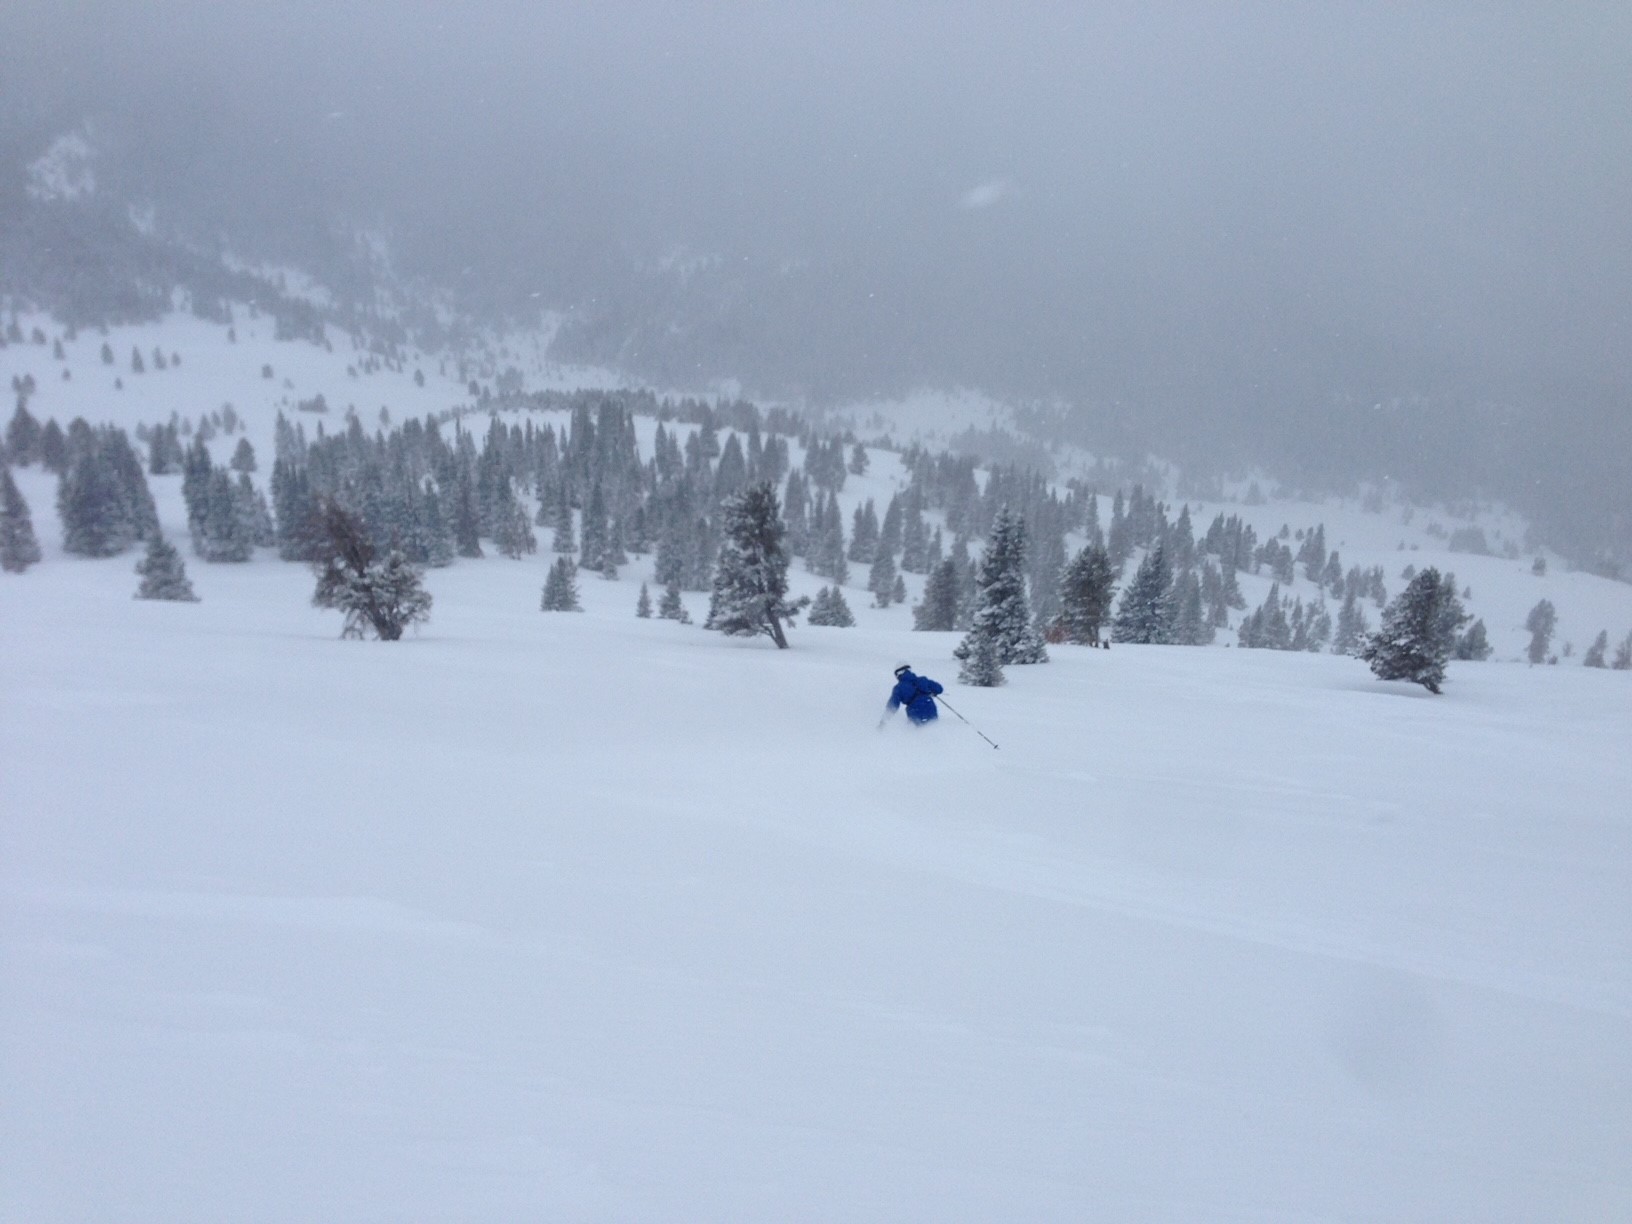 Powder day off of the Mongolia T-bar. Less inspiring terrain, but pow lasts much longer